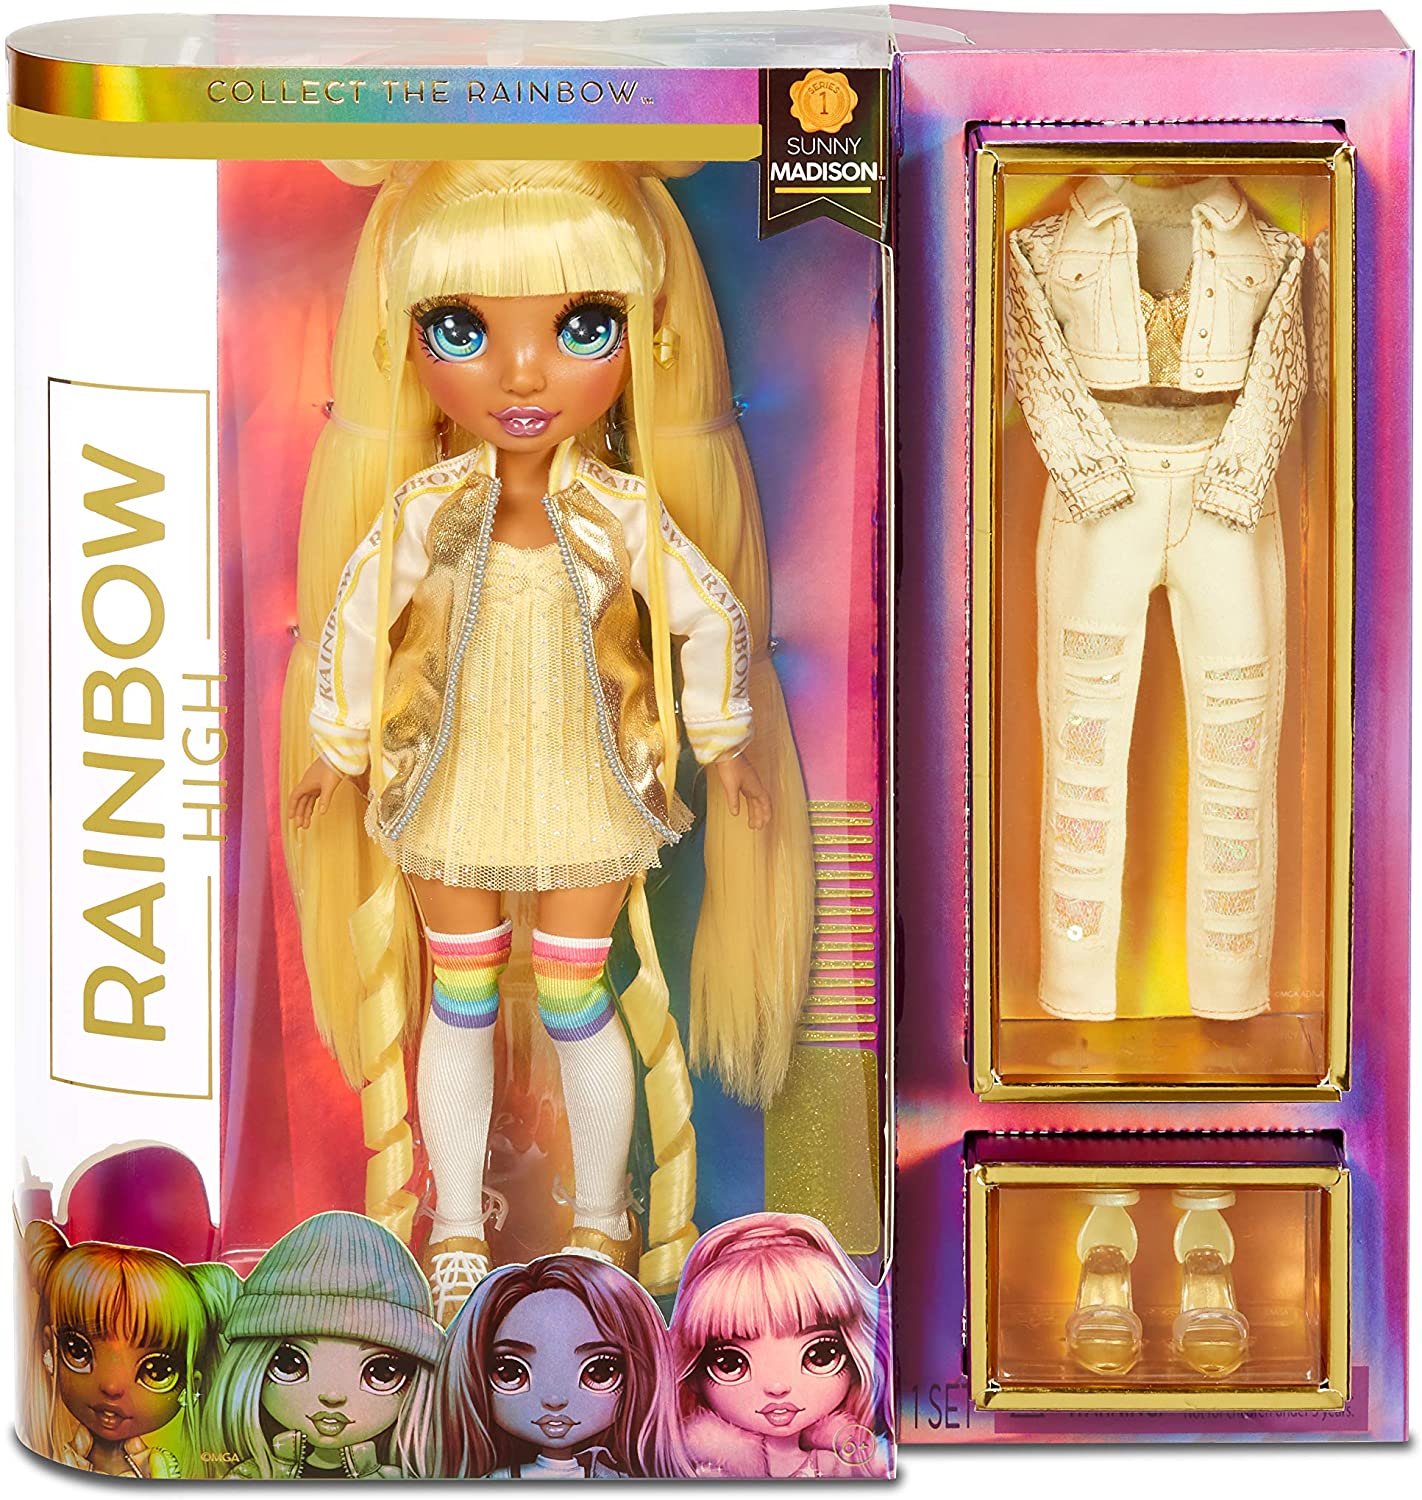 Rainbow High Sunny Madison Yellow doll is available now! - YouLoveIt.com